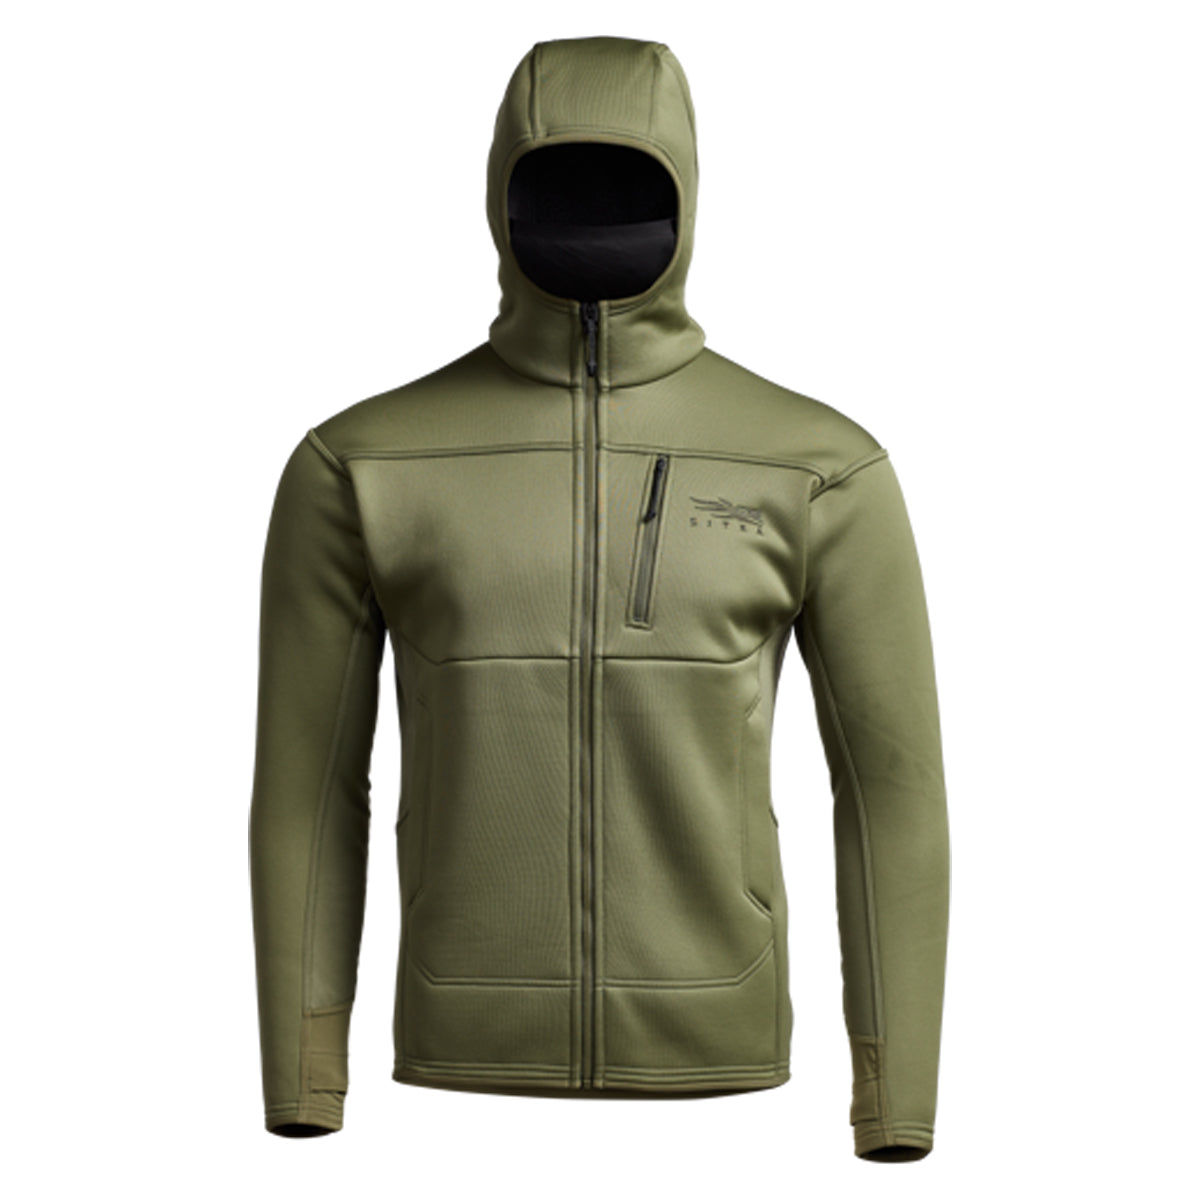 Sitka Traverse Hoody in Dusty Olive by GOHUNT | Sitka - GOHUNT Shop